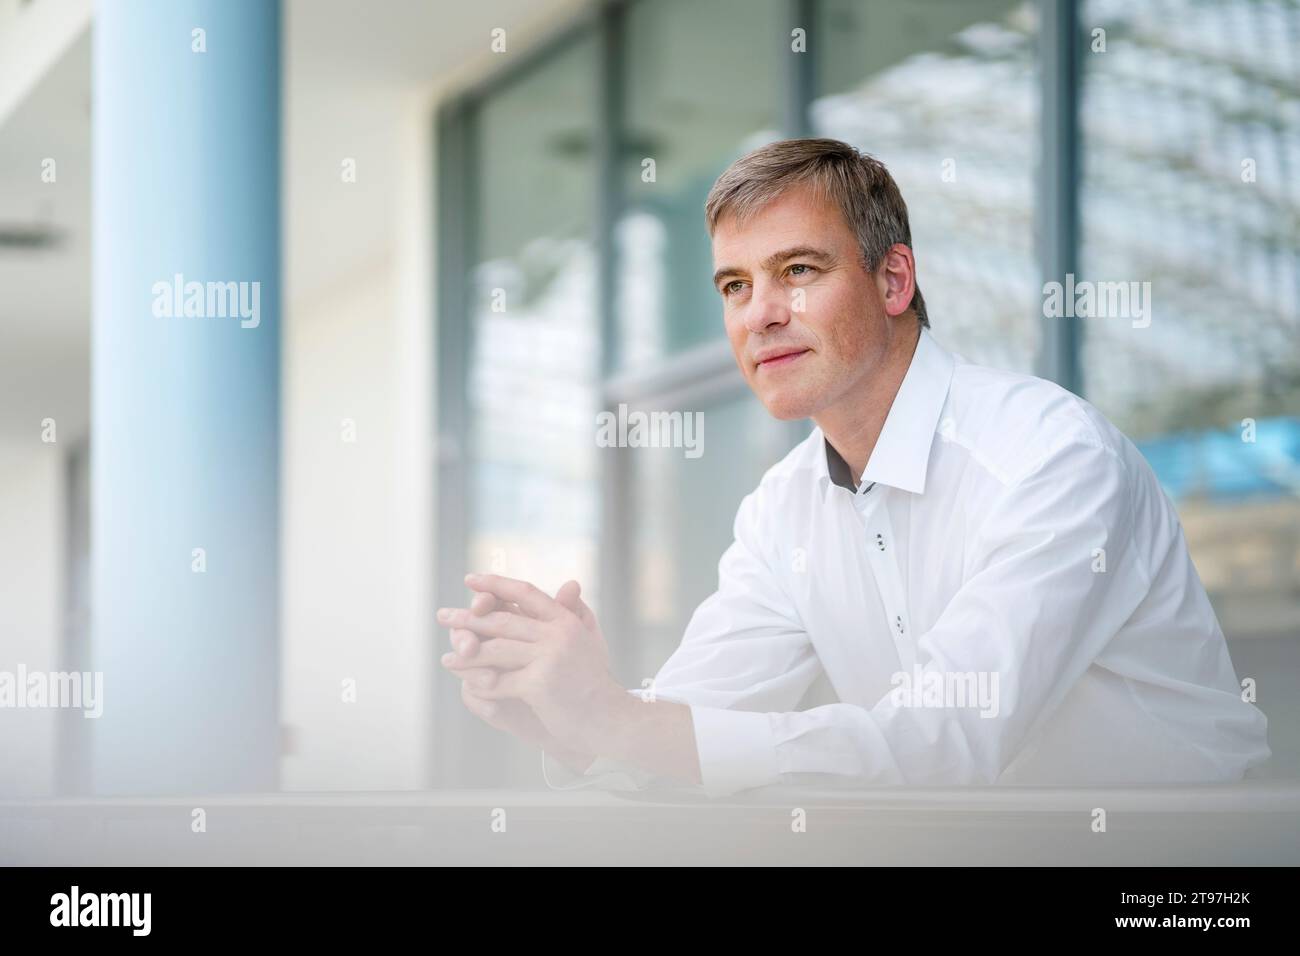 Serene businessman leaning on railing in office building Stock Photo